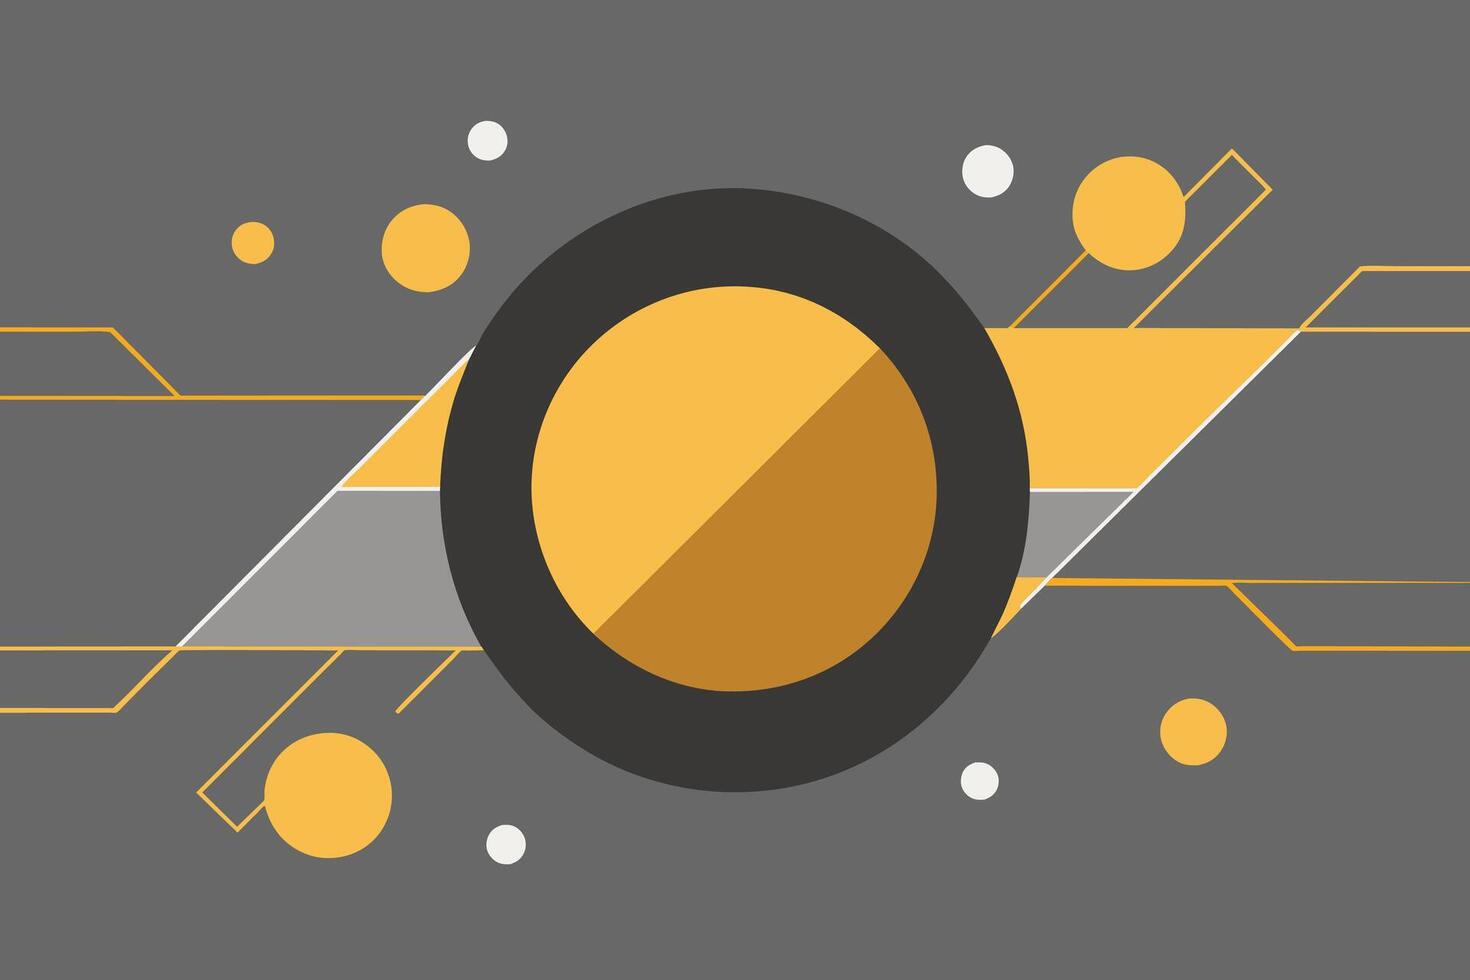 Tech geometric background with abstract golden and grey circles. Vector banner design